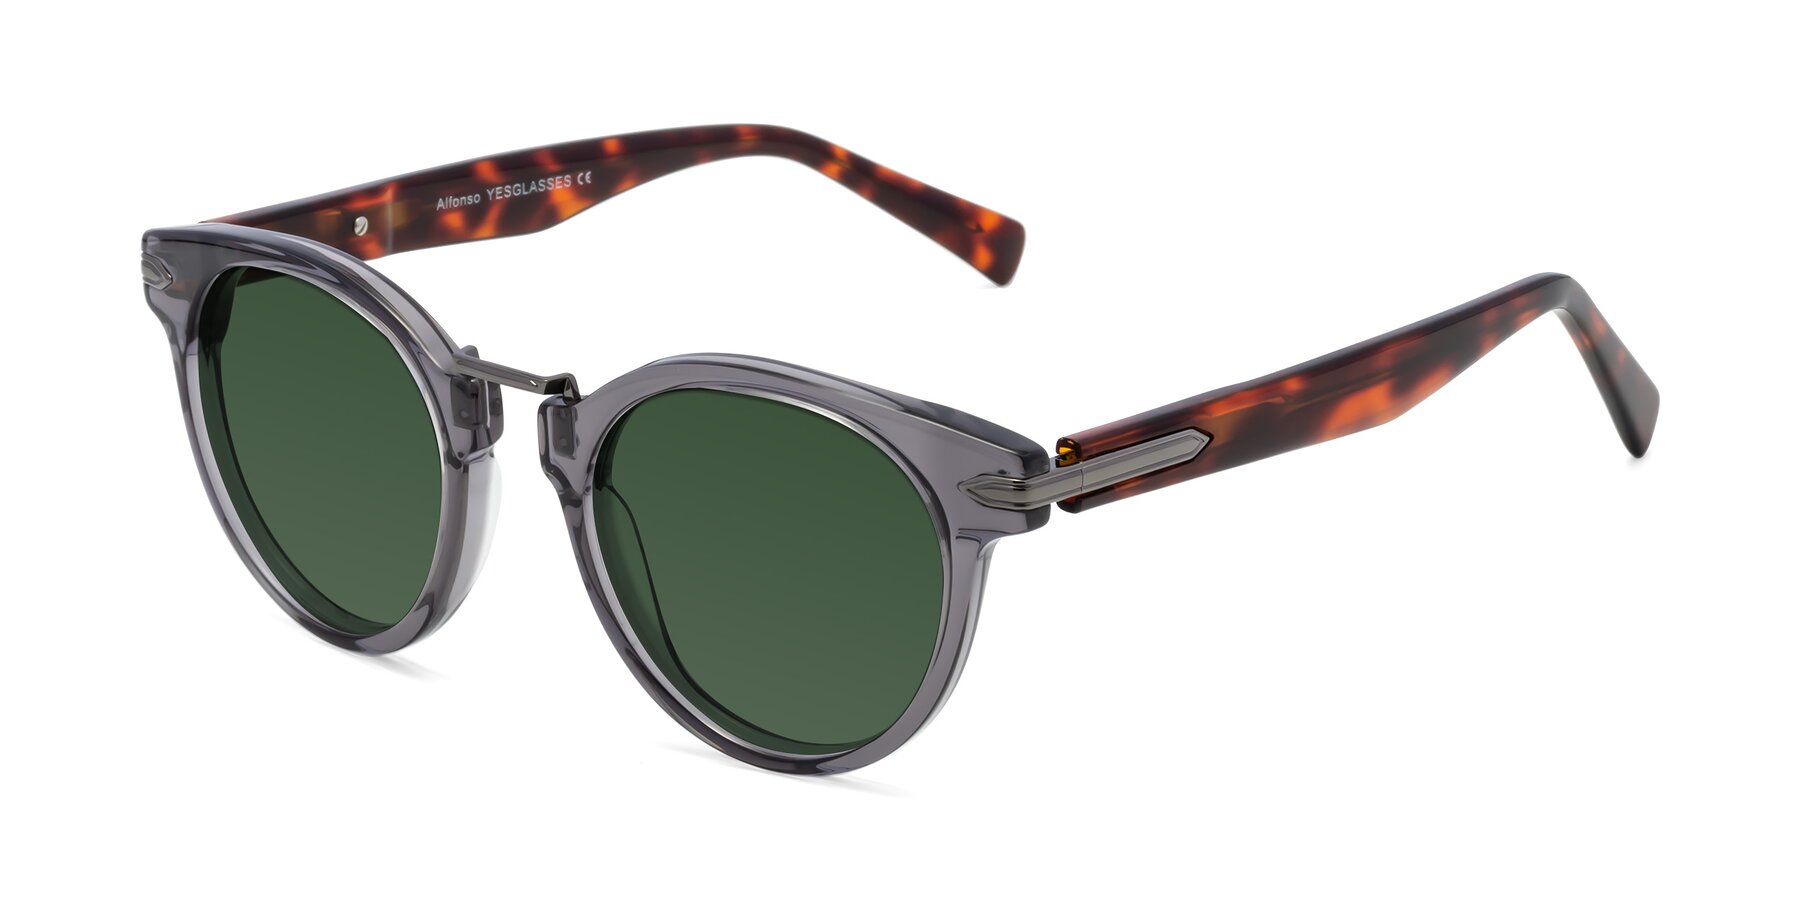 Angle of Alfonso in Gray /Tortoise with Green Tinted Lenses